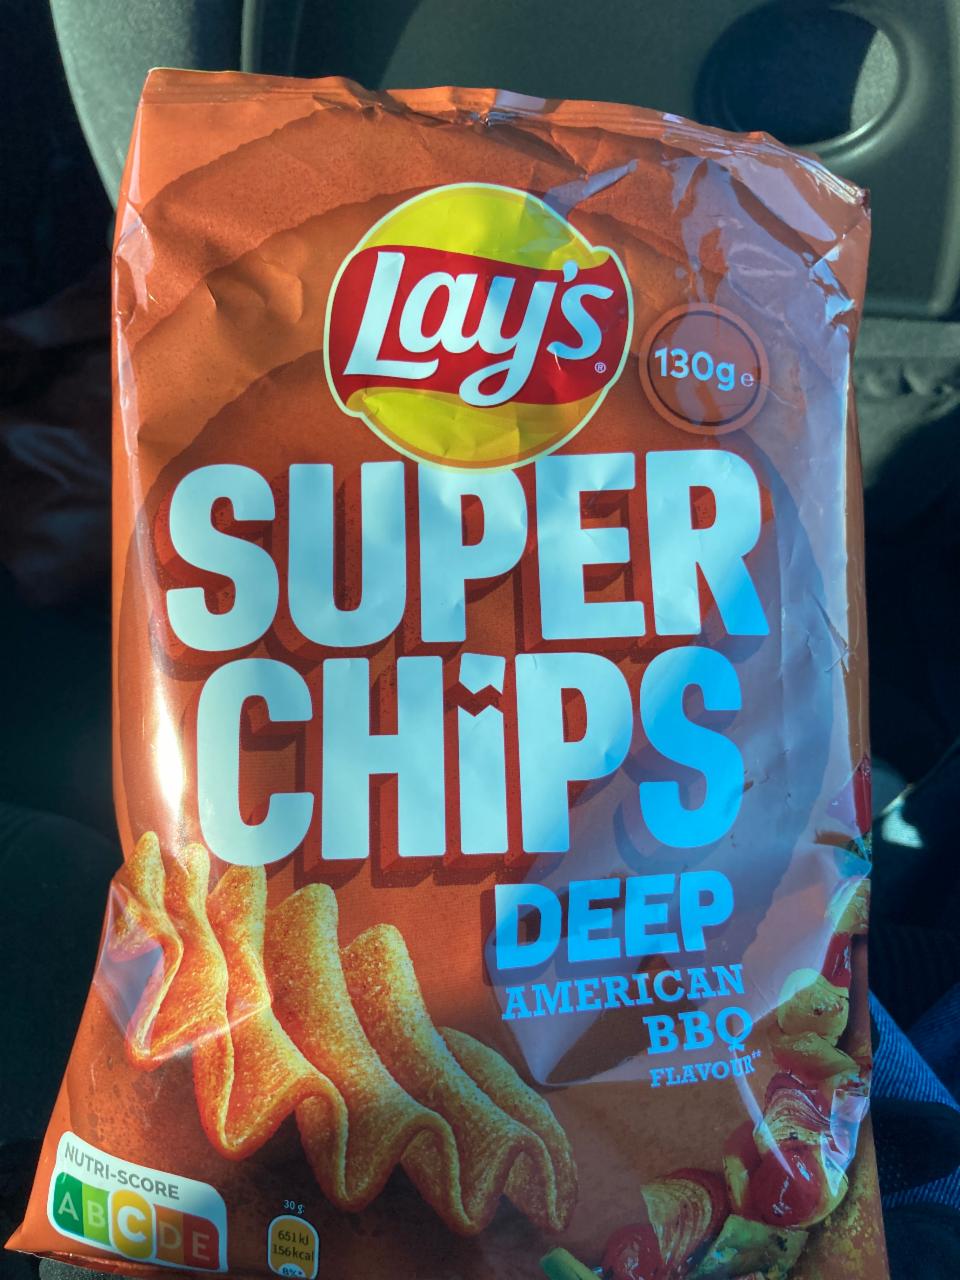 Fotografie - Super Chips Deep American BBQ flavour Lay's